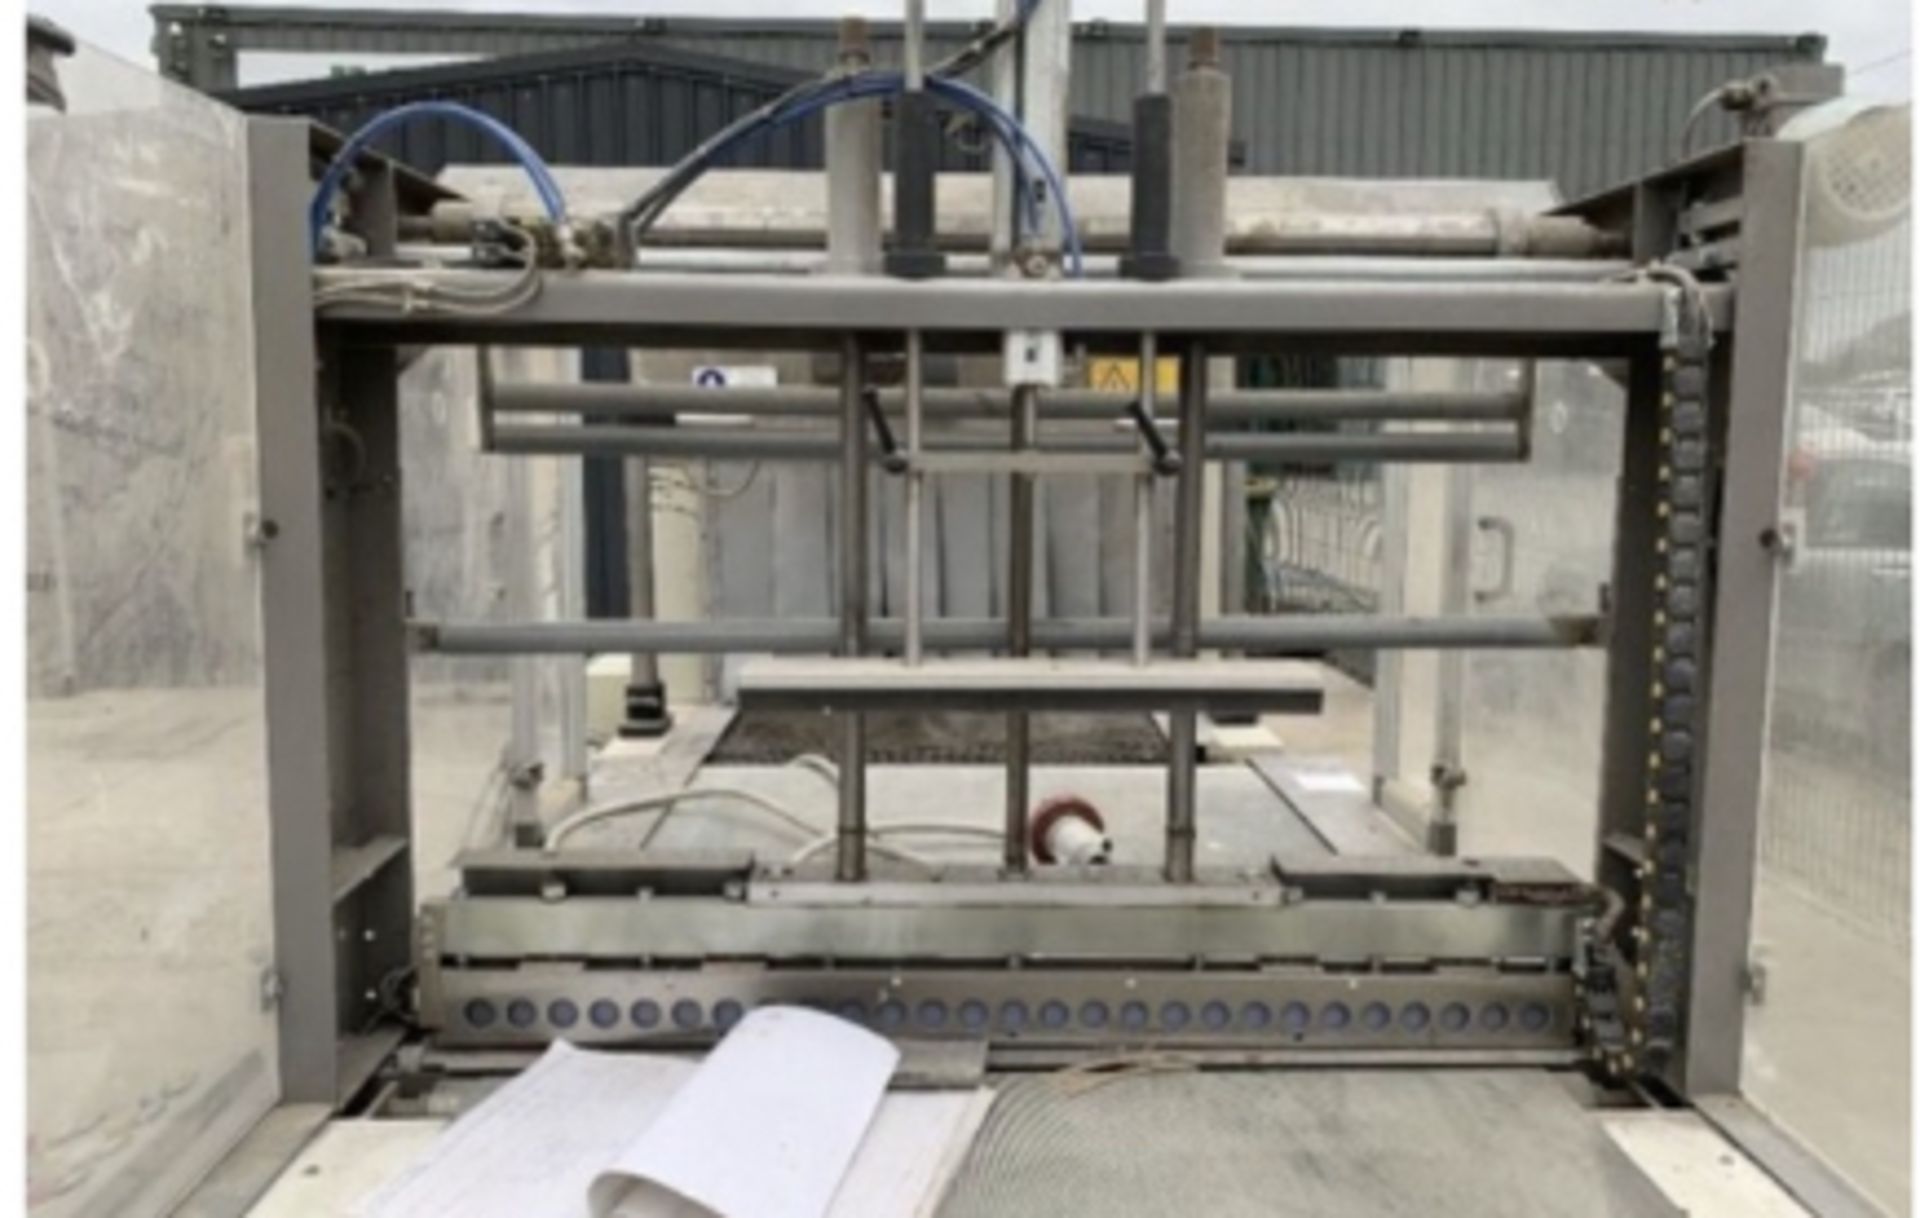 ADPAK COMPACT PSI 3 PHASE SHRINK WRAP SYSTEM .LOCATION NORTHERN IRELAND. - Image 4 of 8